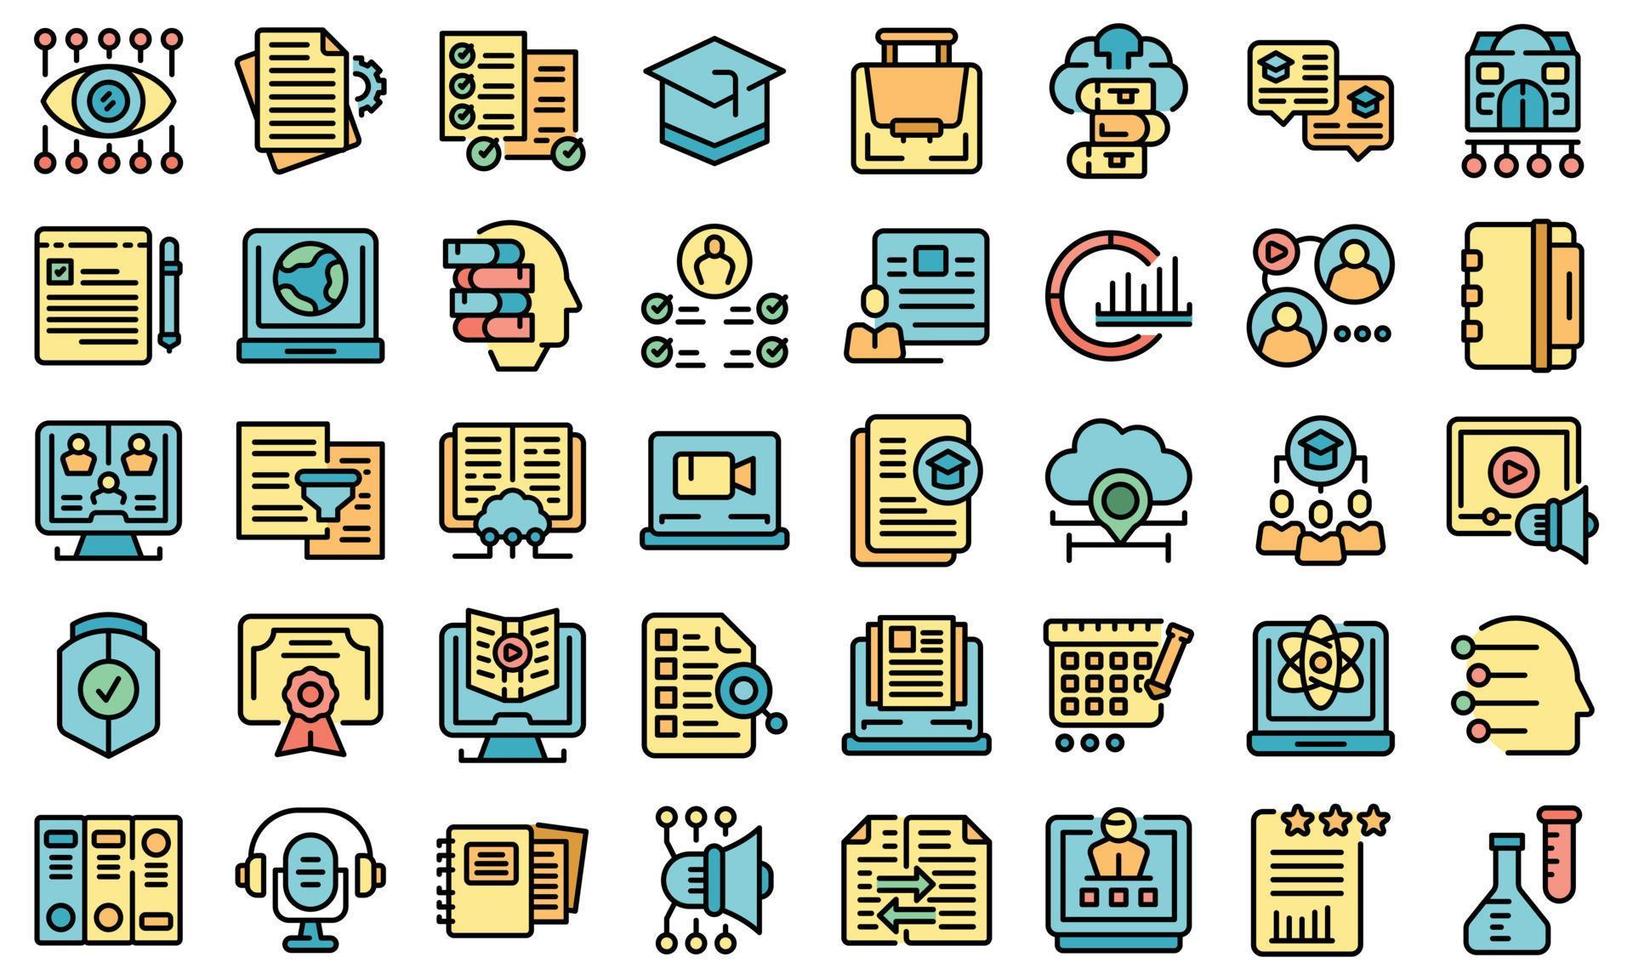 Learning management system icons set vector flat